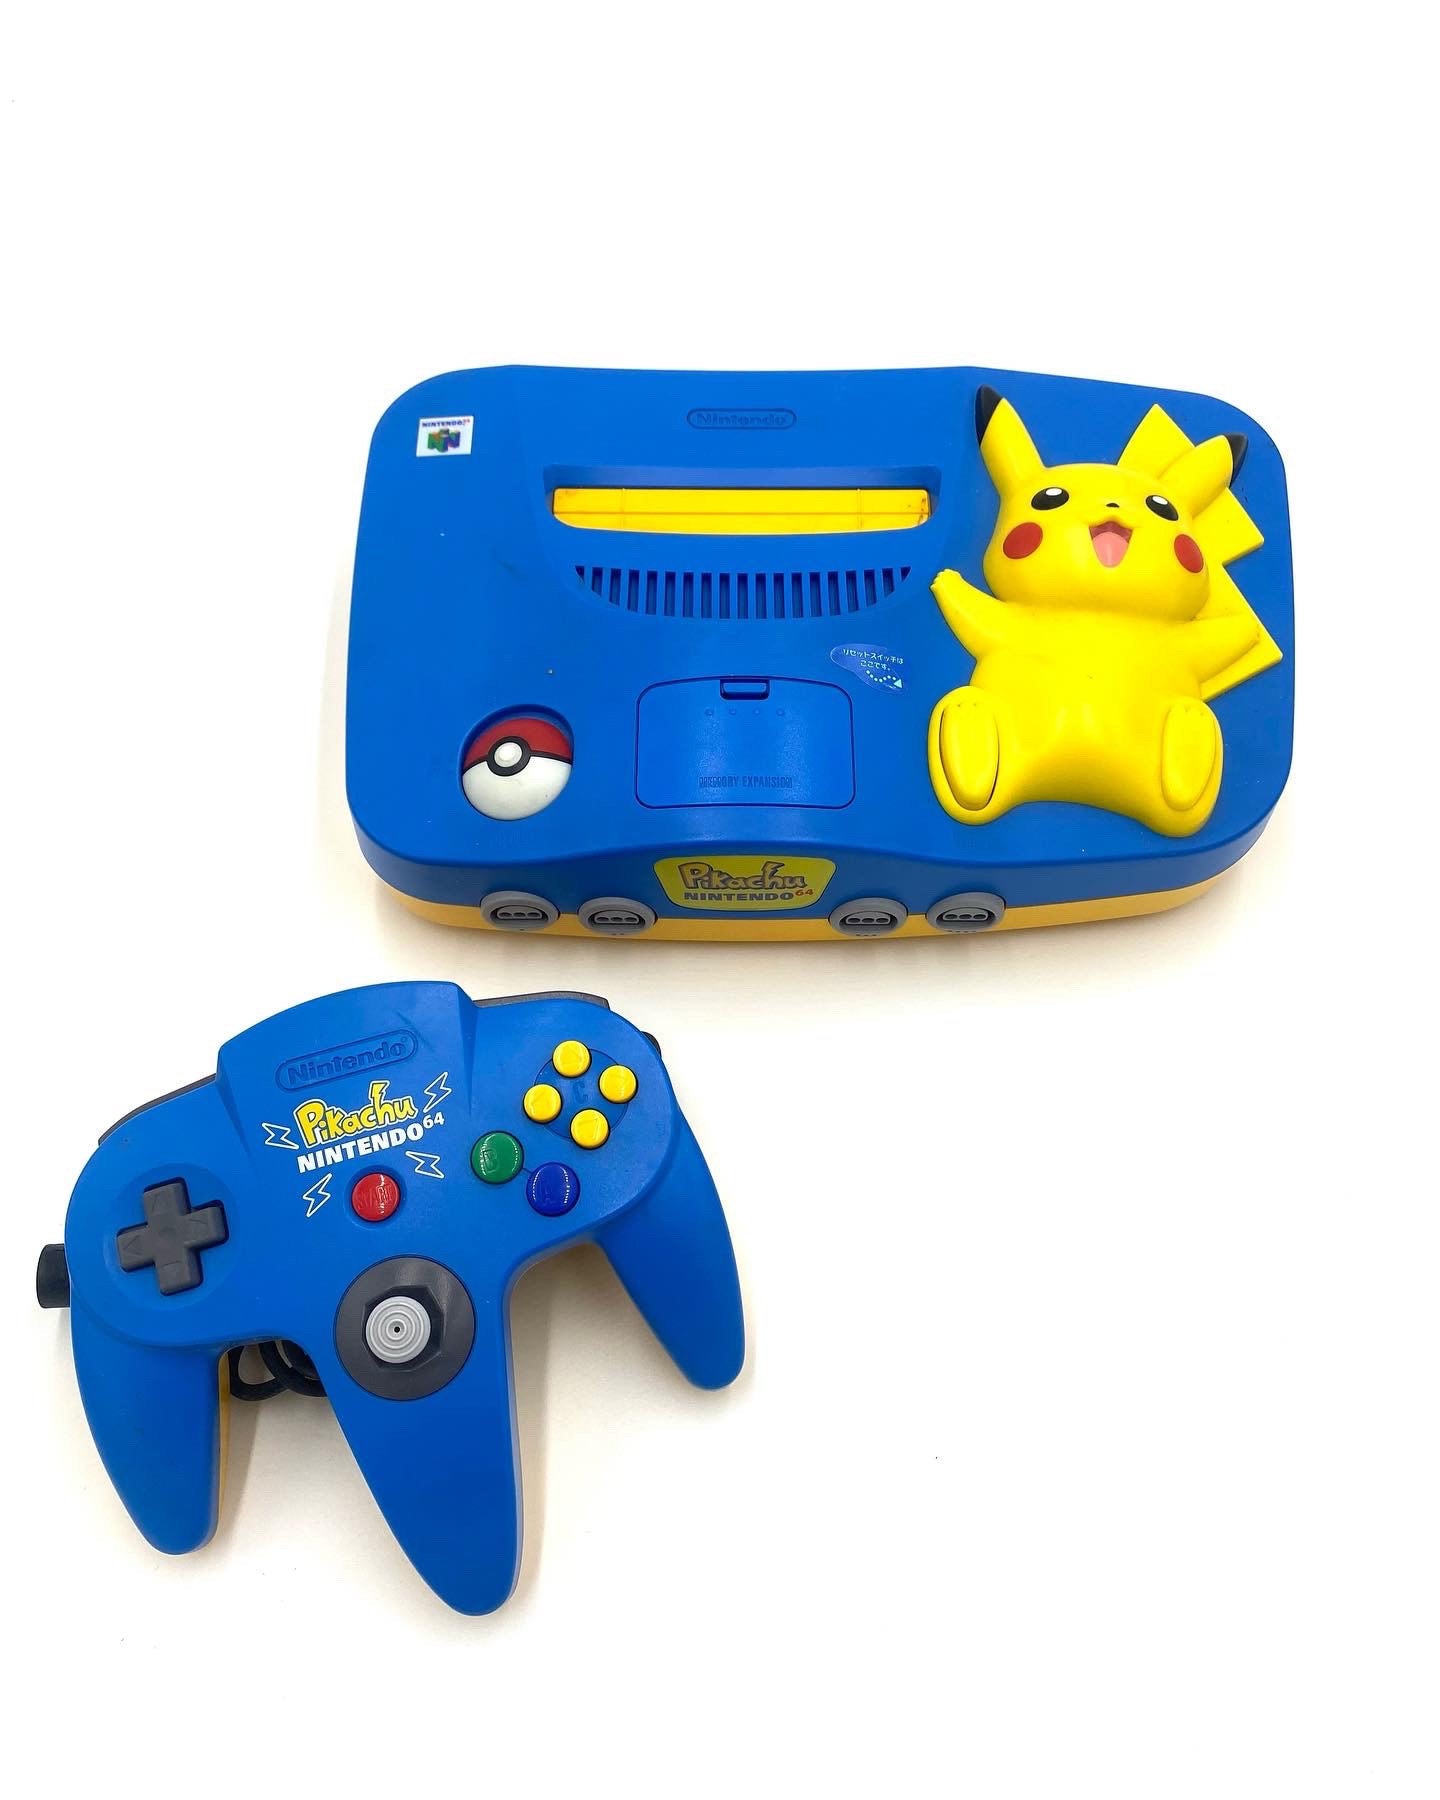 Nintendo 64 Pikachu Blue & Yellow Limited Edition N64 Console - Etsy